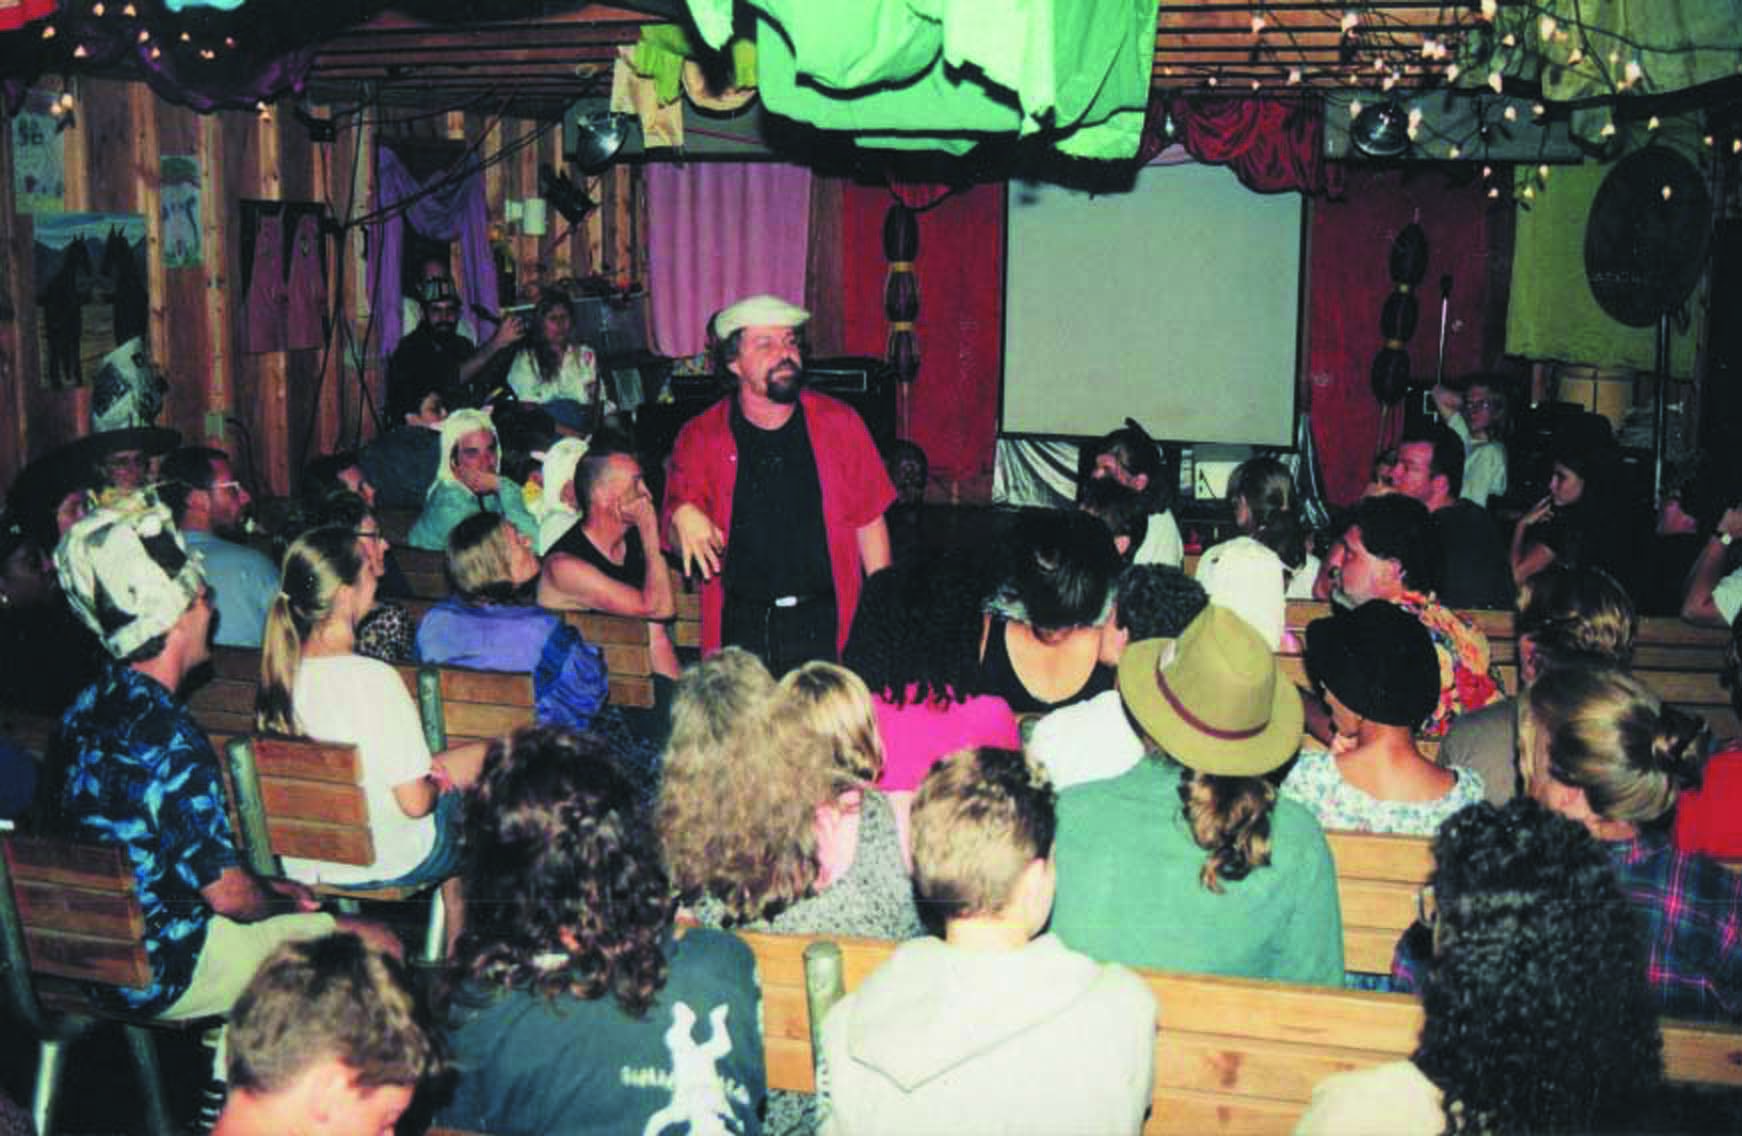 A photo of an event at Cafe Bizzozos. The audience is seated on wooden benches, and colorful art hangs from the ceiling and walls.